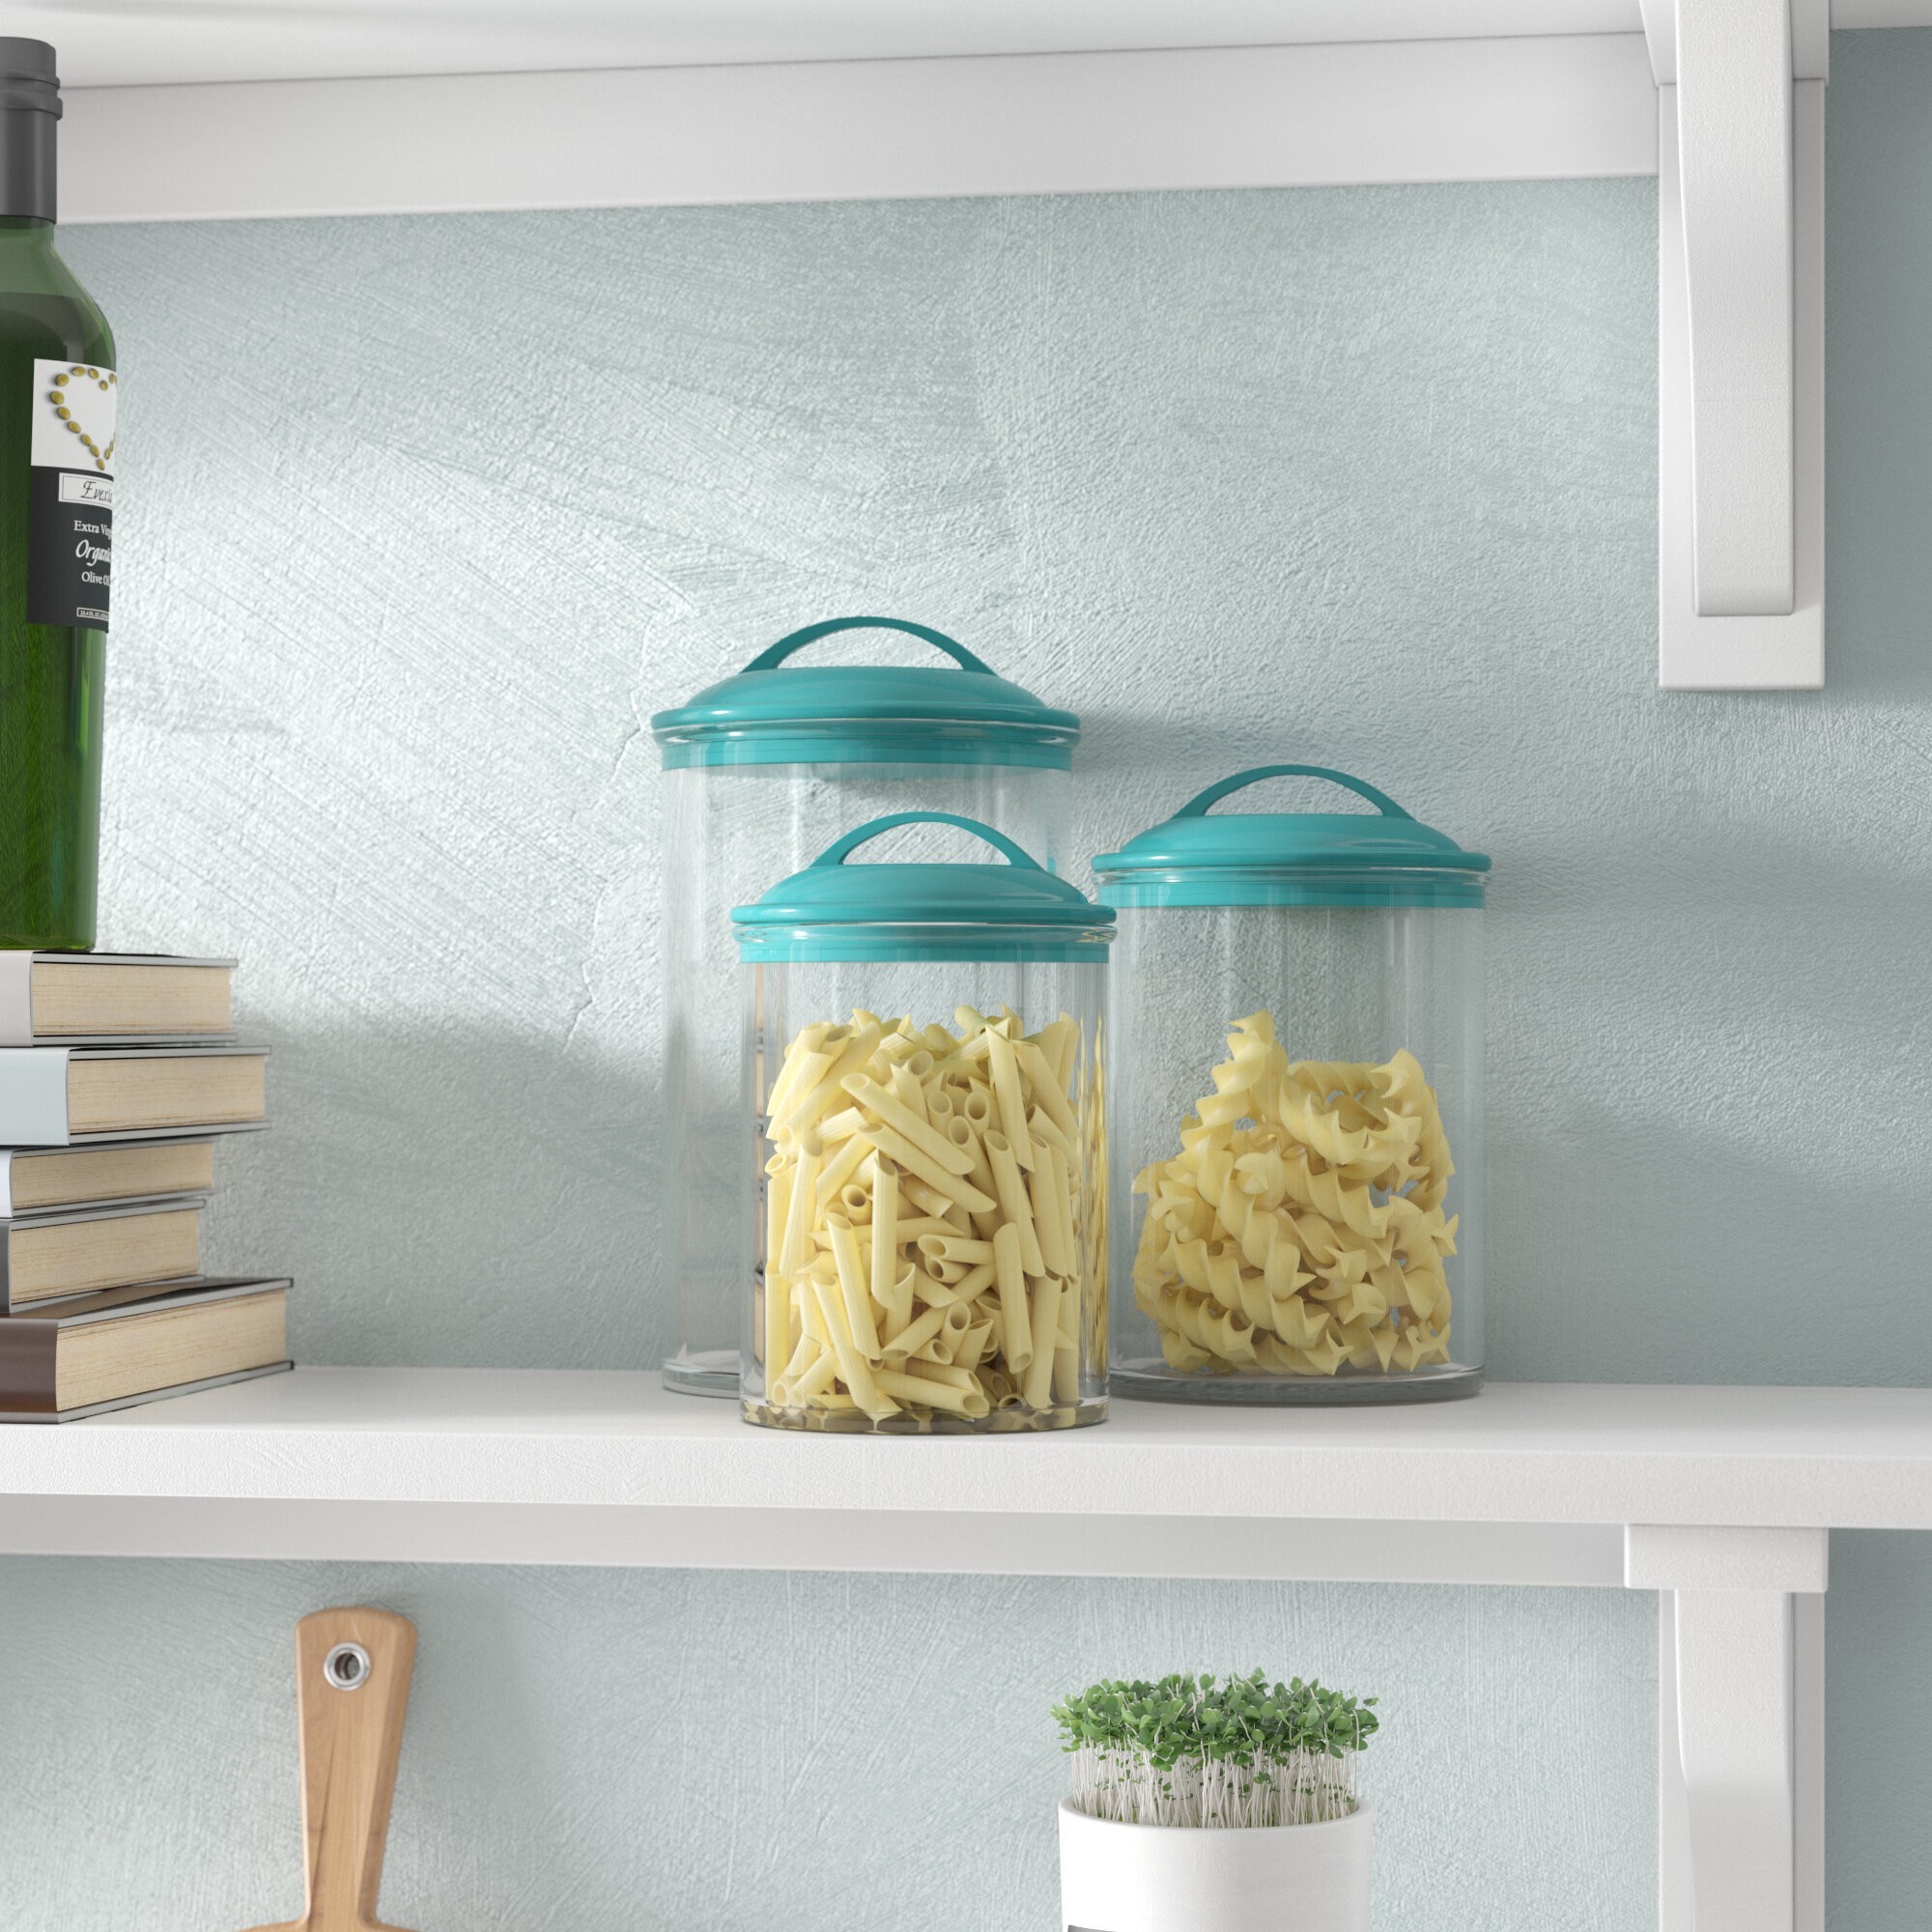 Decorative Kitchen Canisters - Foter